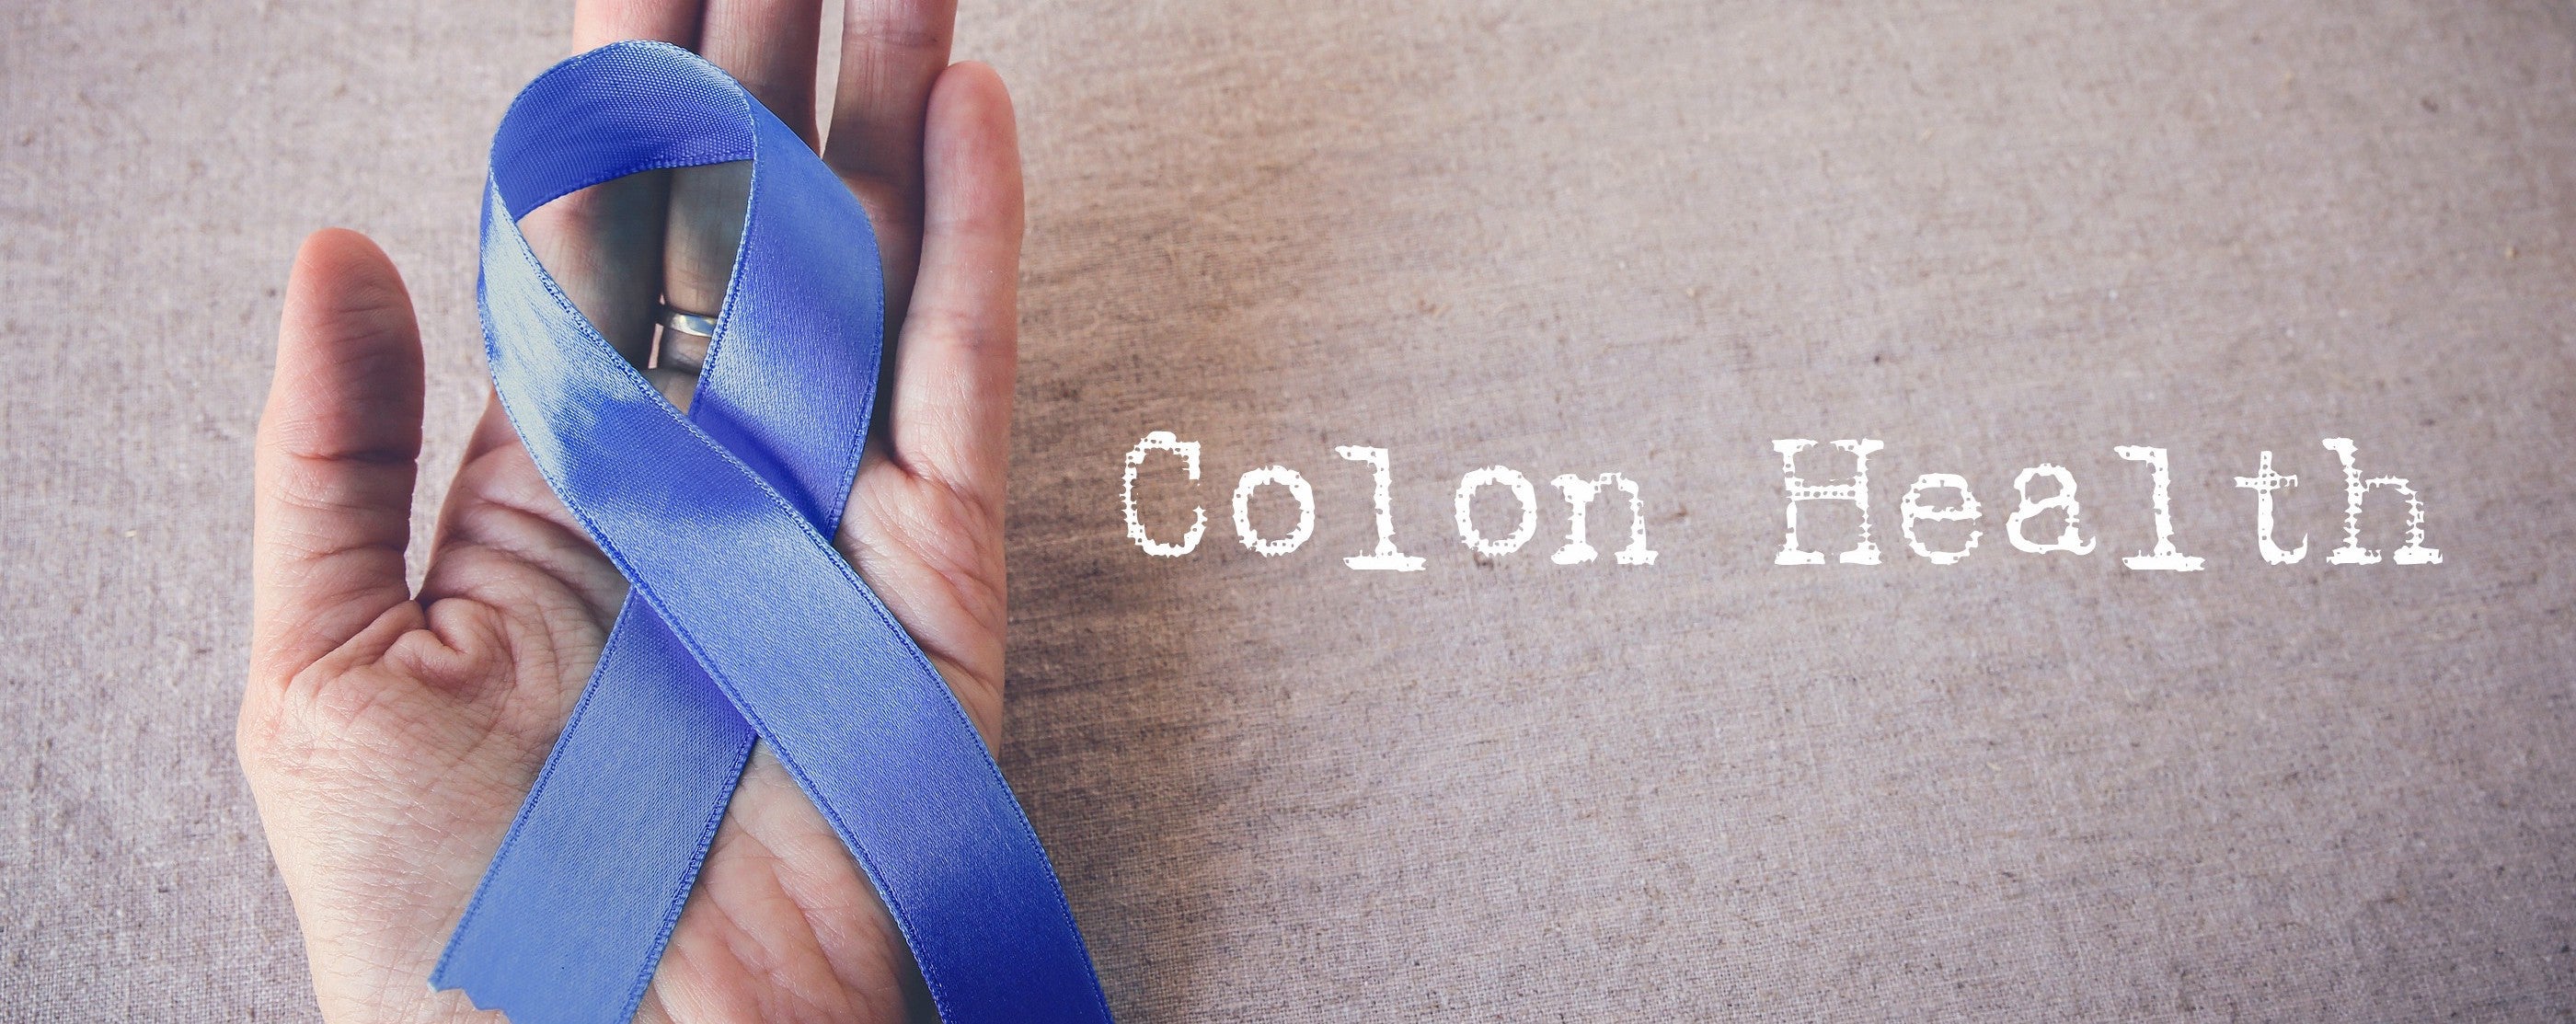 5 Easy-To-Find Foods To Restore Colon Health - Detox Organics